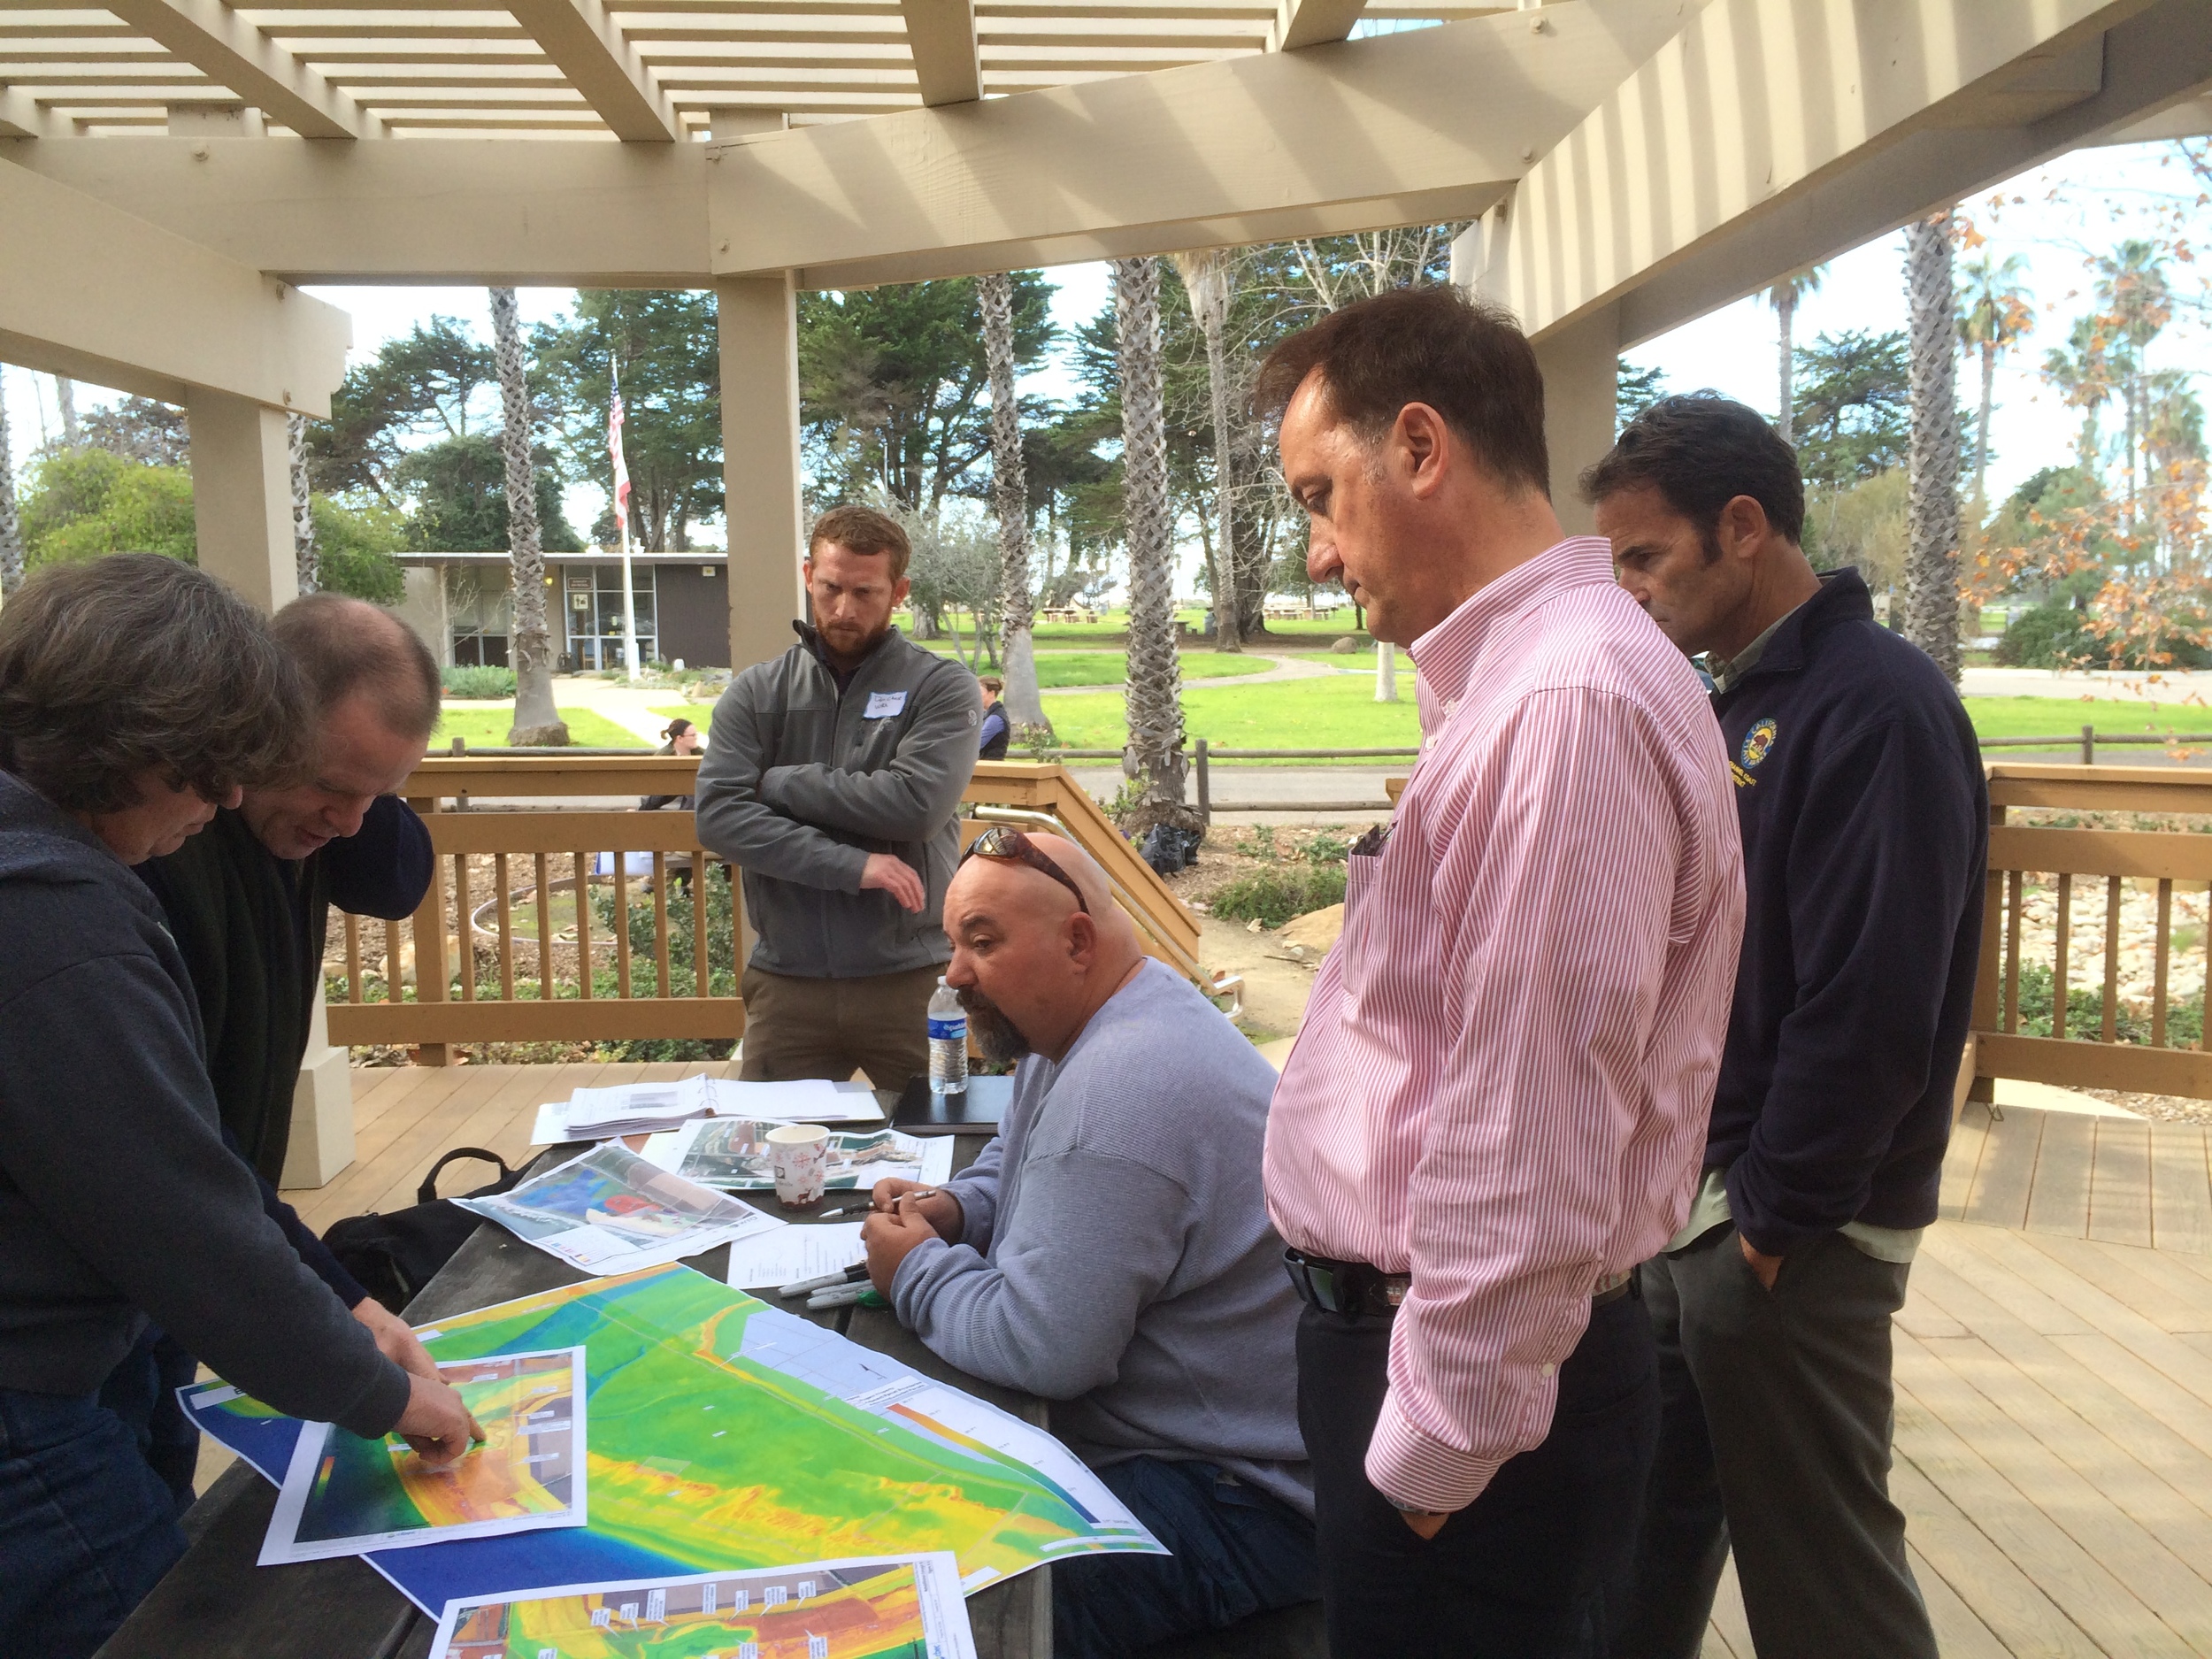   Over 50 scientific and technical experts from state, local, and federal agencies and universities providing input during Wishtoyo  ’  s Restoration Design Charrette at State Parks Channel Coast District headquarters.&nbsp;  